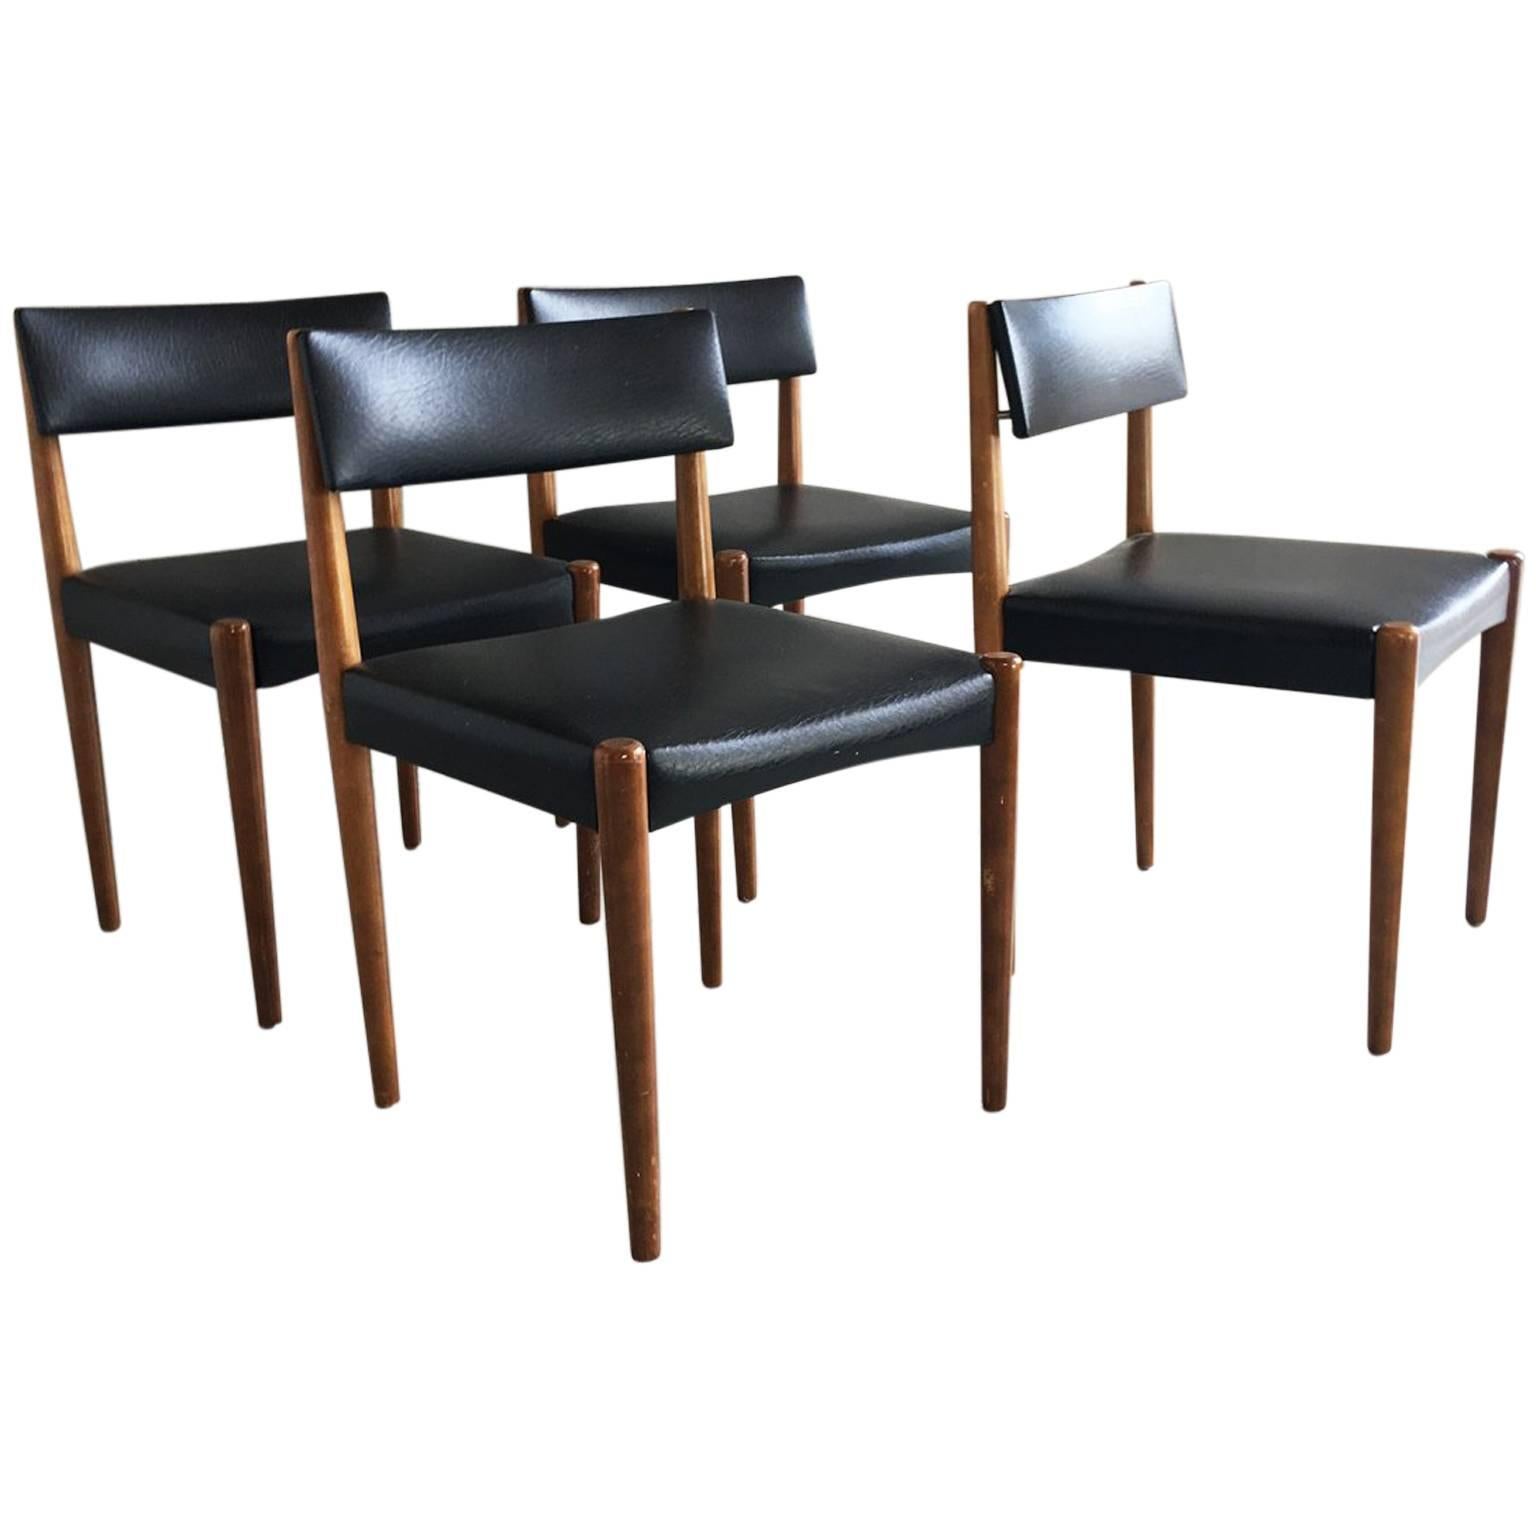 Set of Four 1970s Mid-Century Teak and Black Vinyl Dining Chairs